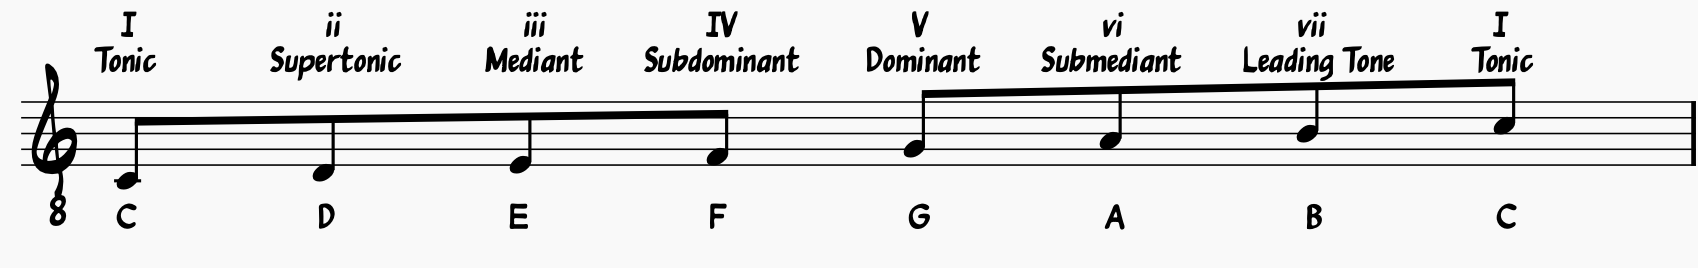 C Major with Scale Degrees and Numerals Labeled